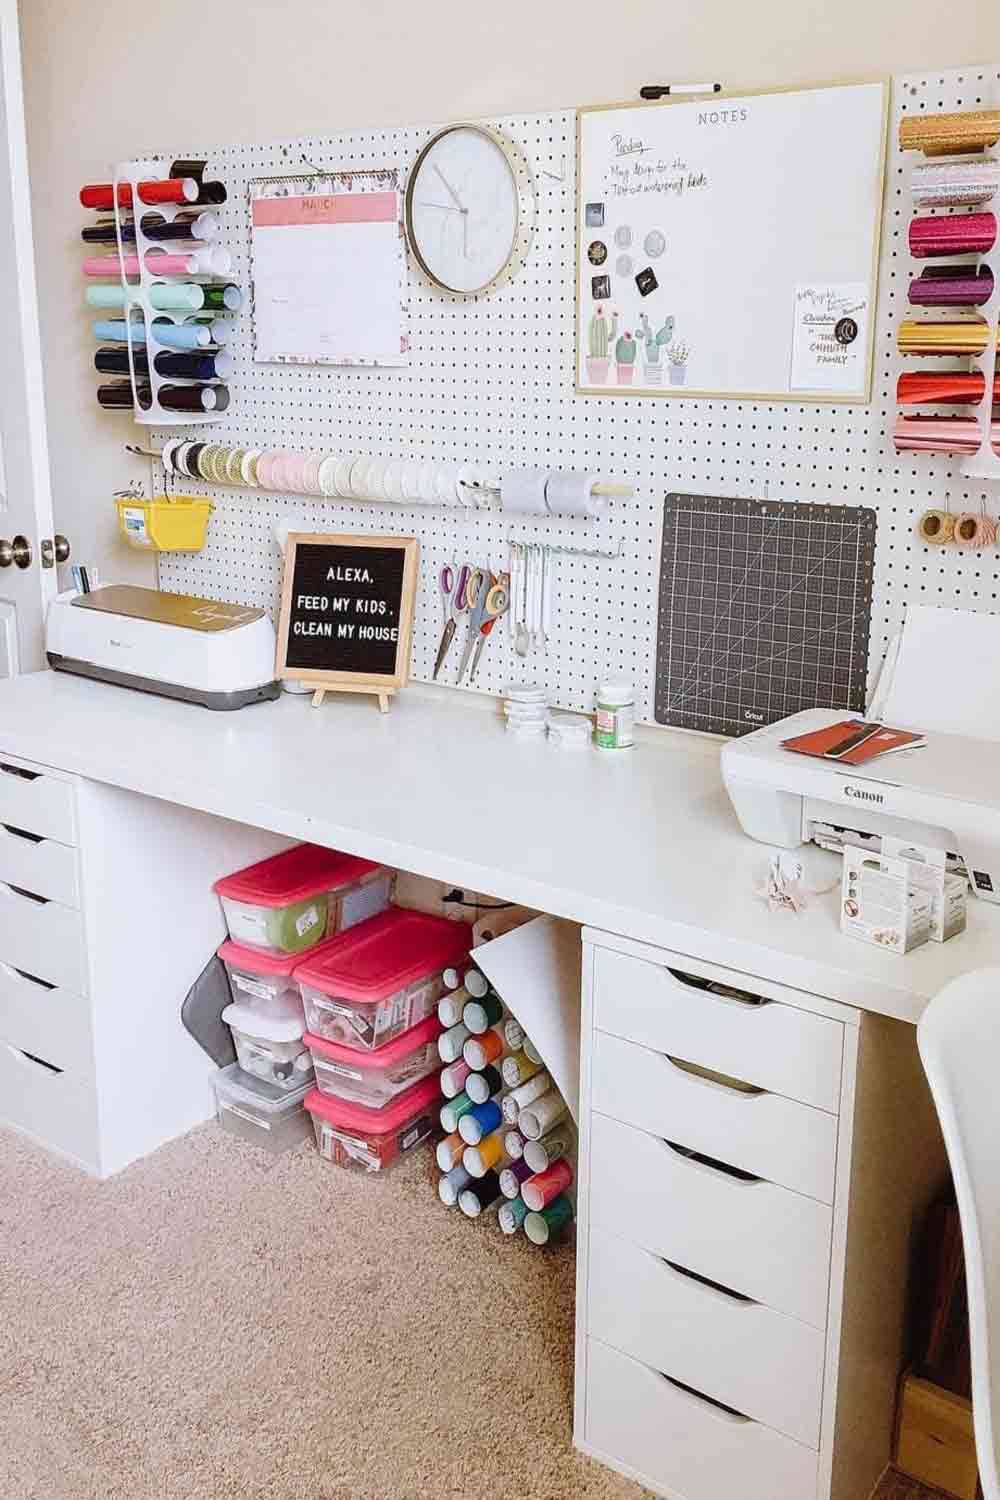 Home Office Desk: How to Make It Stylish & Practical | Glaminati.com